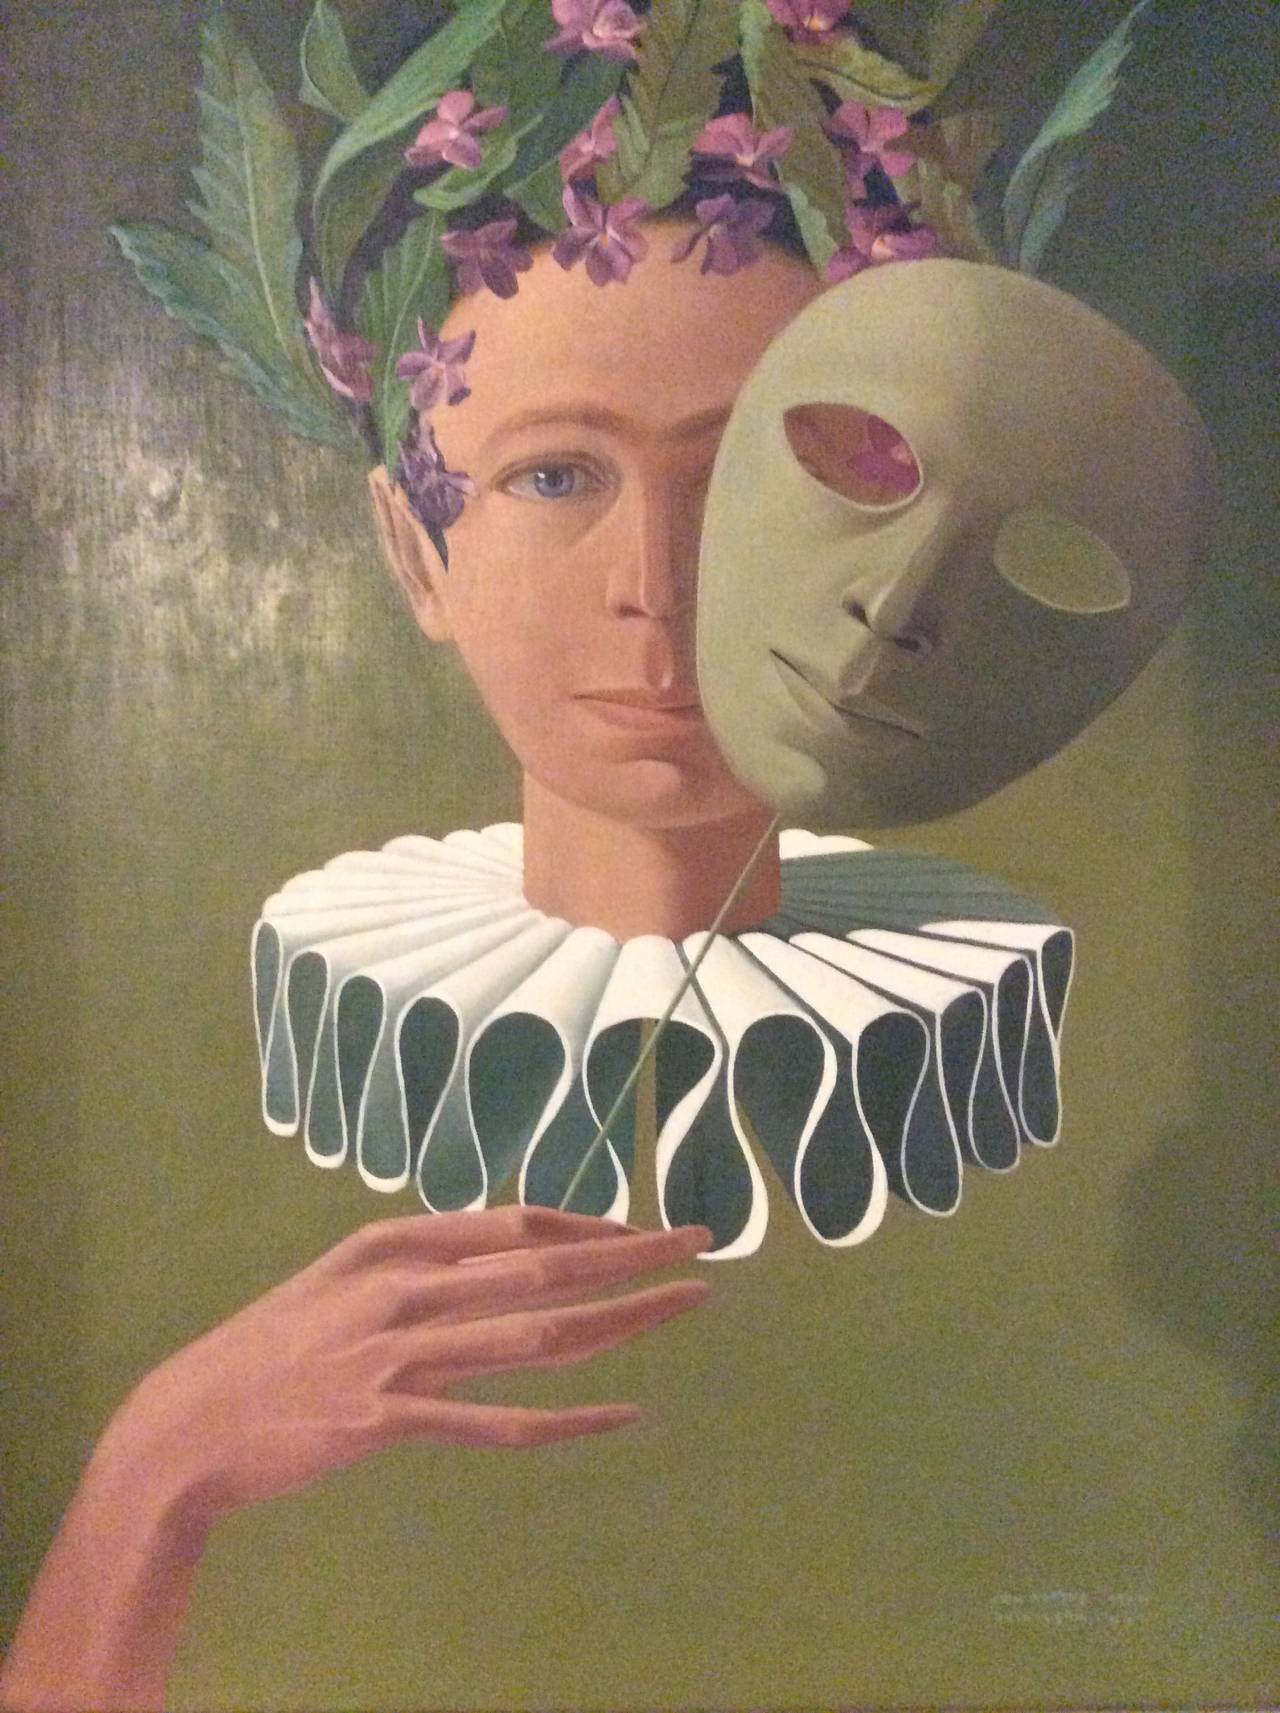 Pair of fantasy portraits of 'Spring' and Summer' by acclaimed Latin American realist painter. Peter Von Artens, Argentina, B 1937-2003.
Realist portraits combining classical the theme of the seasons with realism and fantasy and surrealism. A new